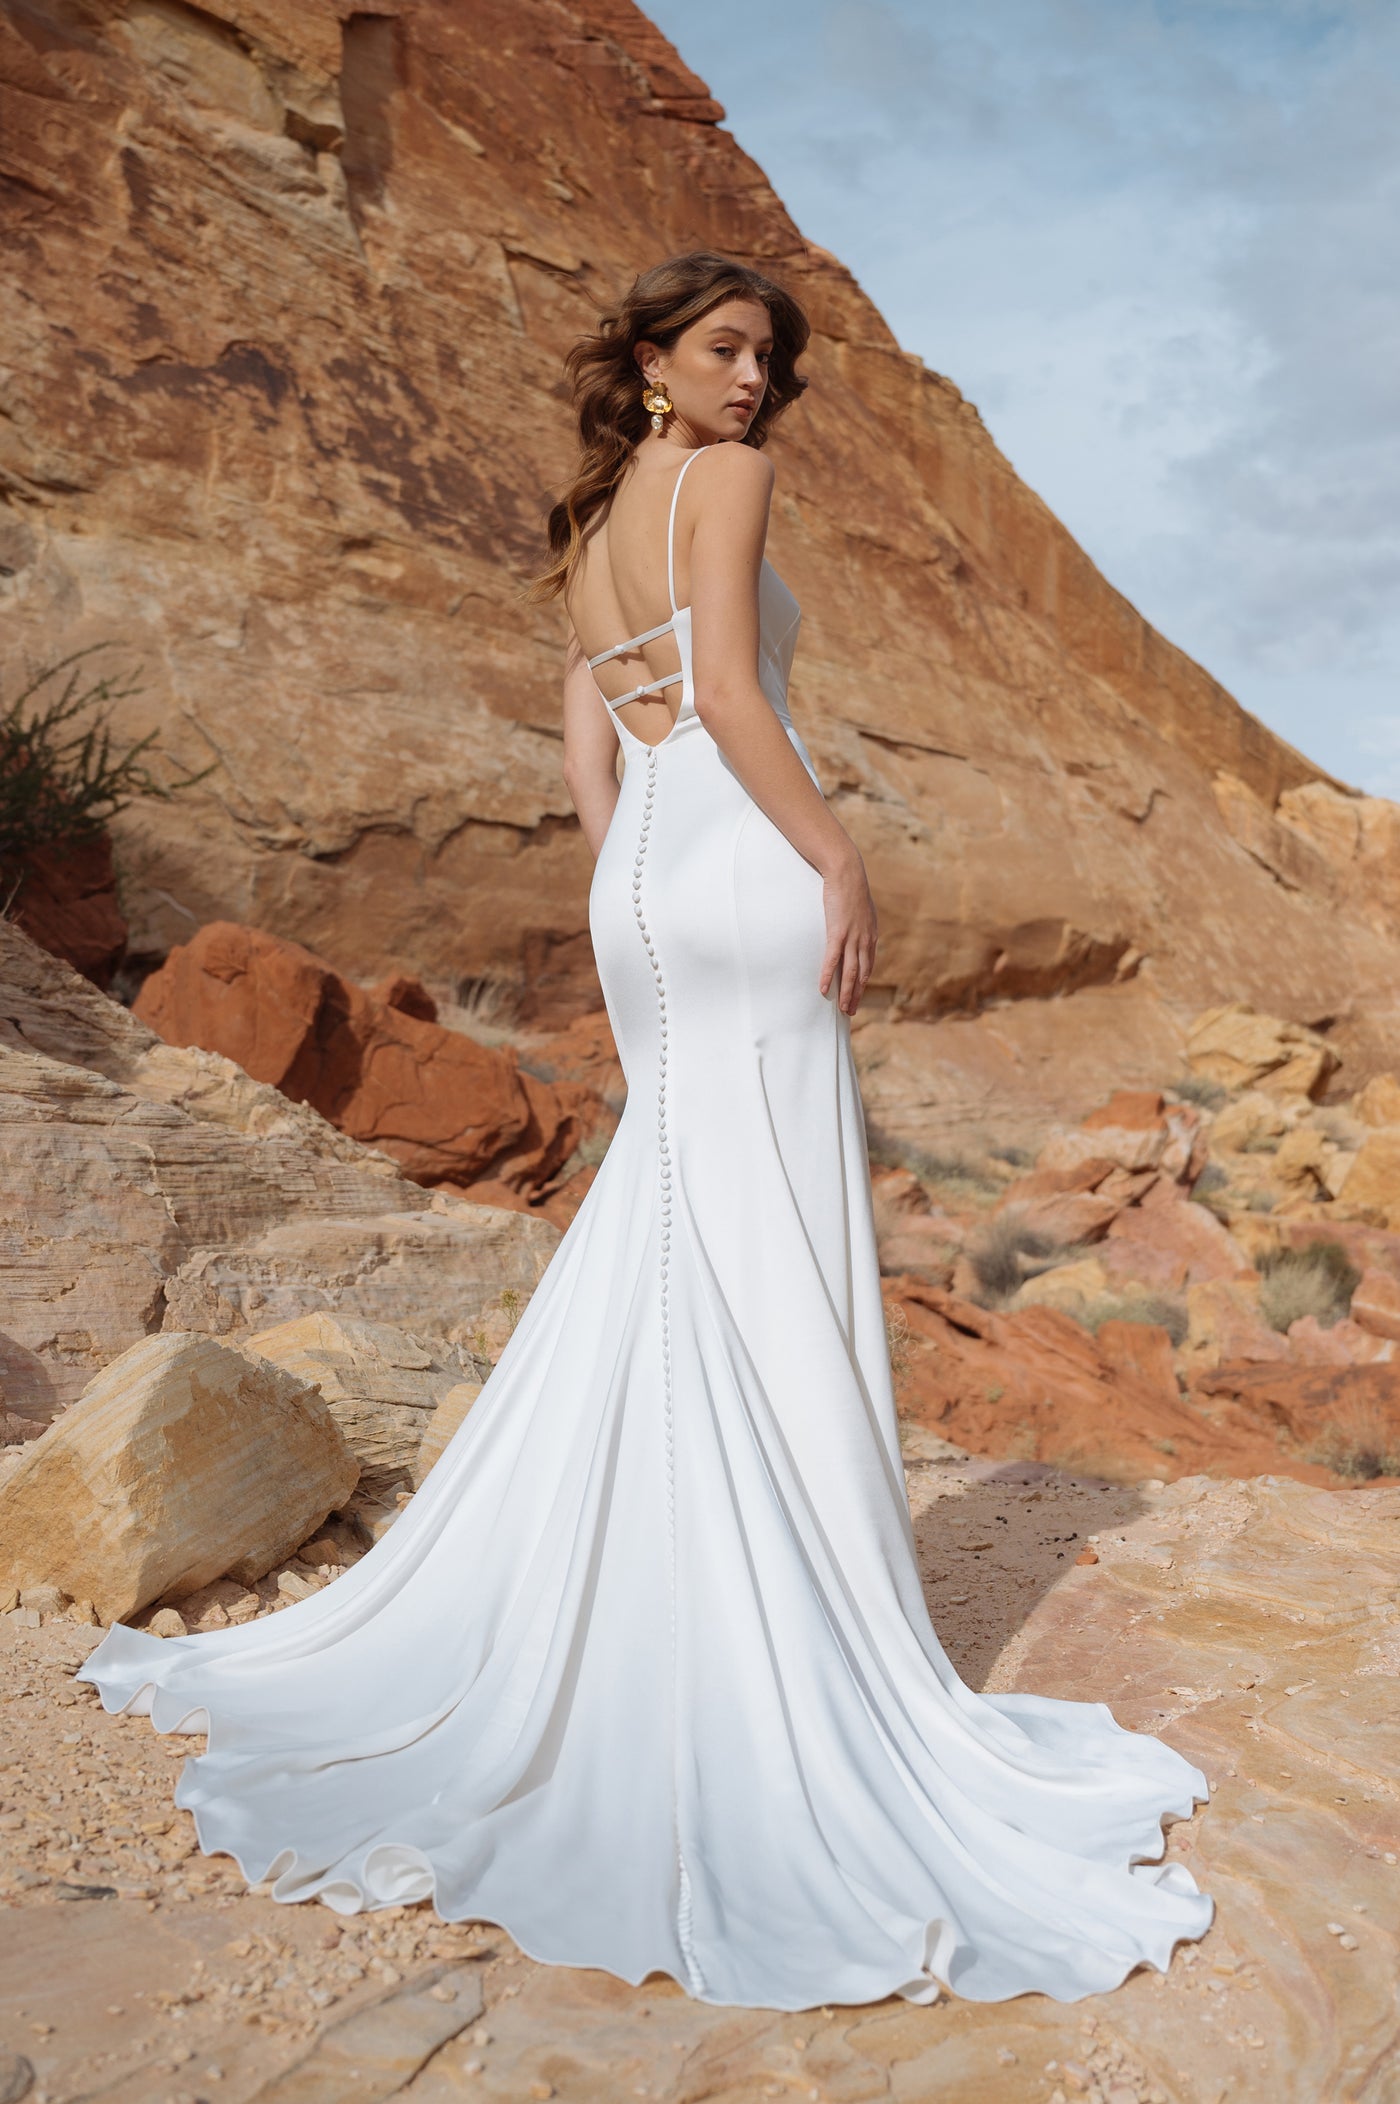 A woman in an elegant Jenny Yoo Wedding Dress with a trailing hem stands against a rocky desert backdrop.